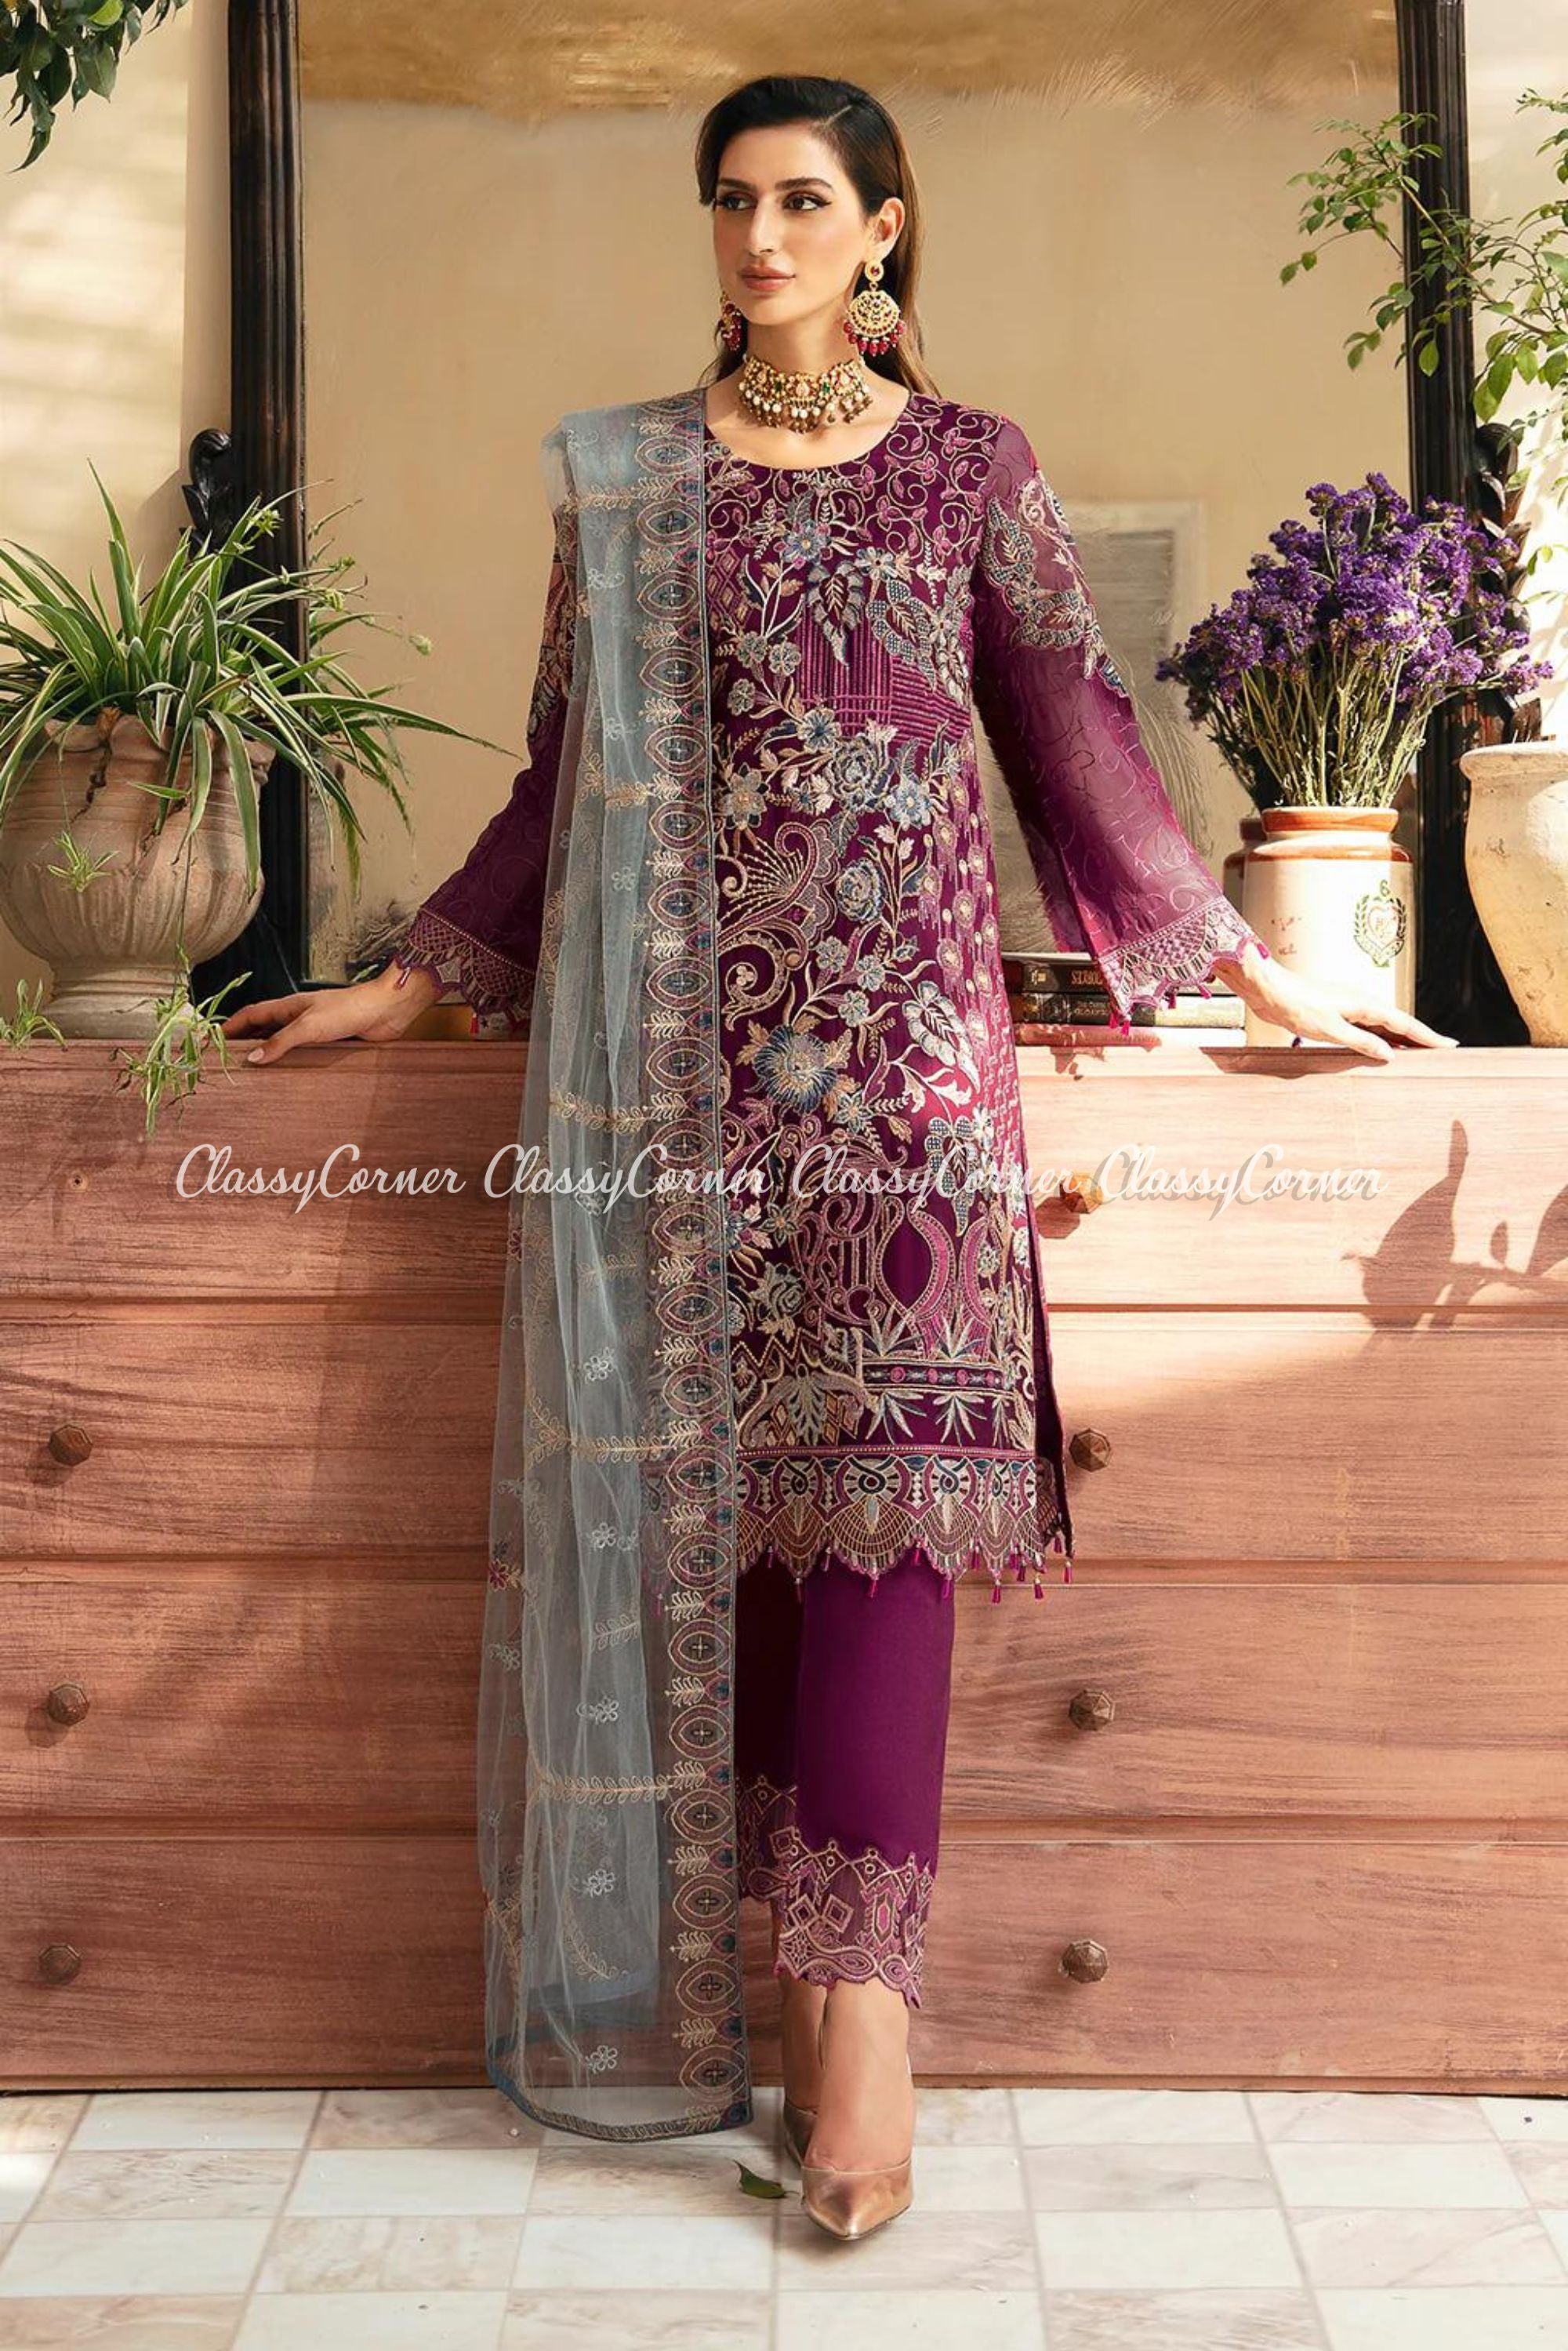 Pakistani Formal Wedding Party Outfits